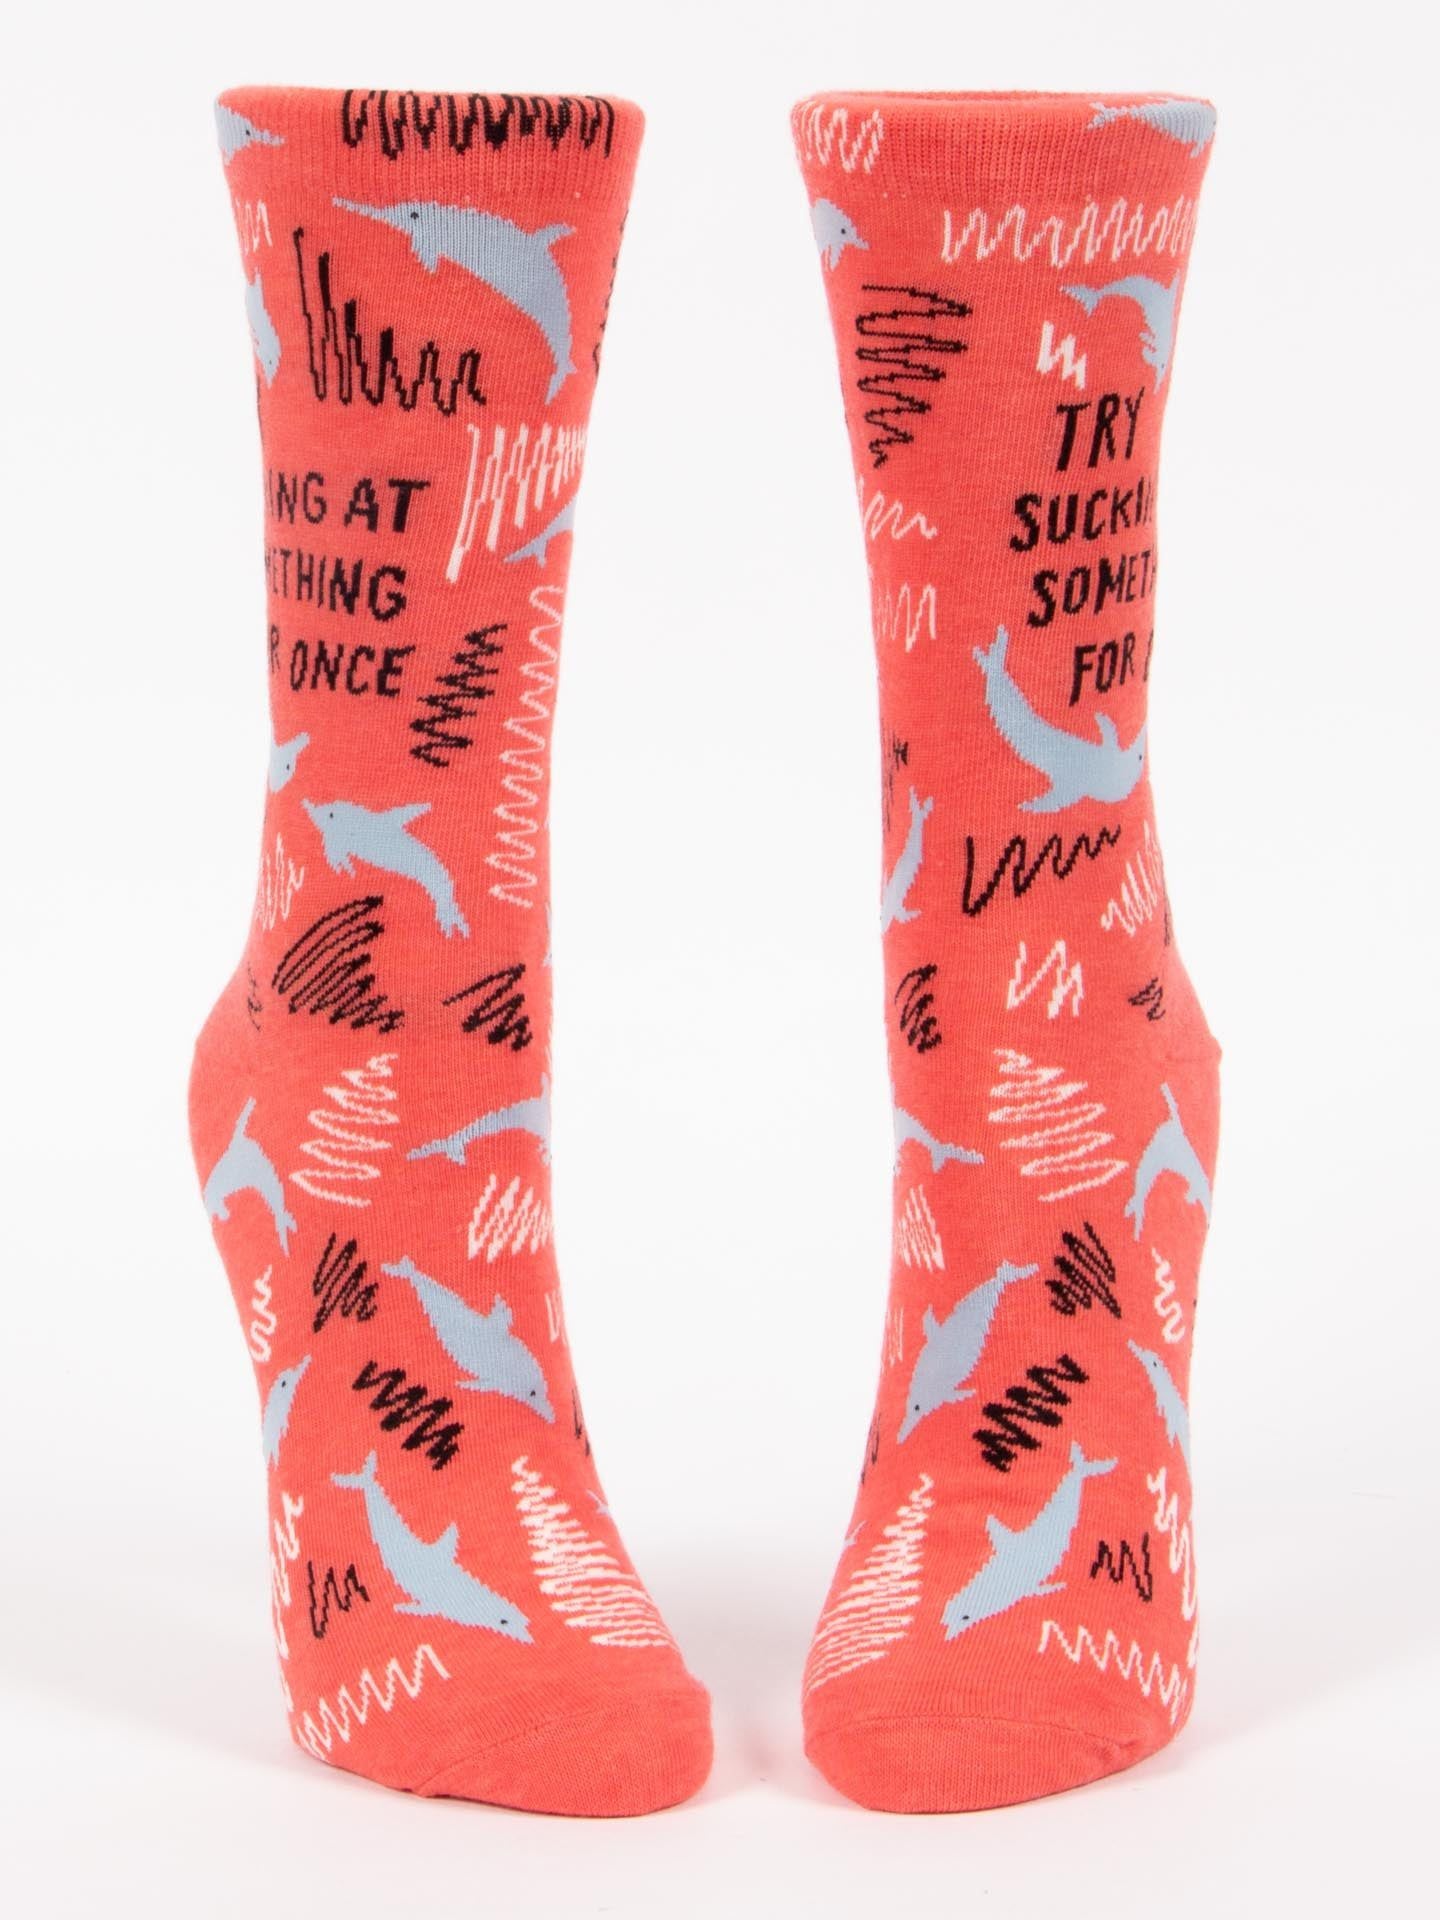 Try Sucking At Something For Once Women's Crew Socks-Apparel > Apparel & Accessories > Clothing > Underwear & Socks-Quinn's Mercantile